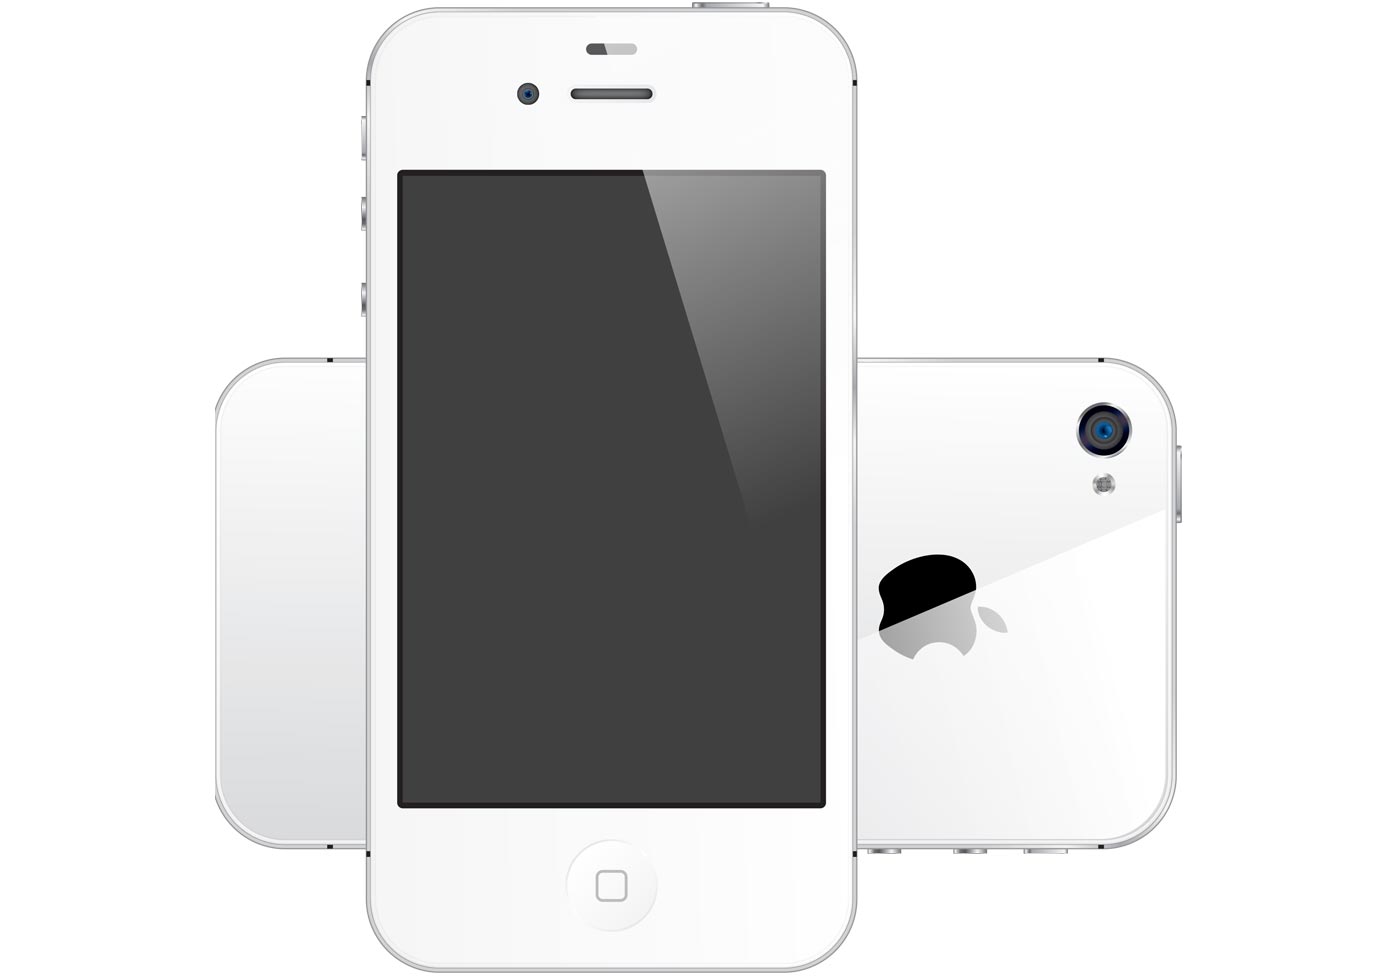 Download iPhone 4S white free vector - Download Free Vector Art, Stock Graphics & Images